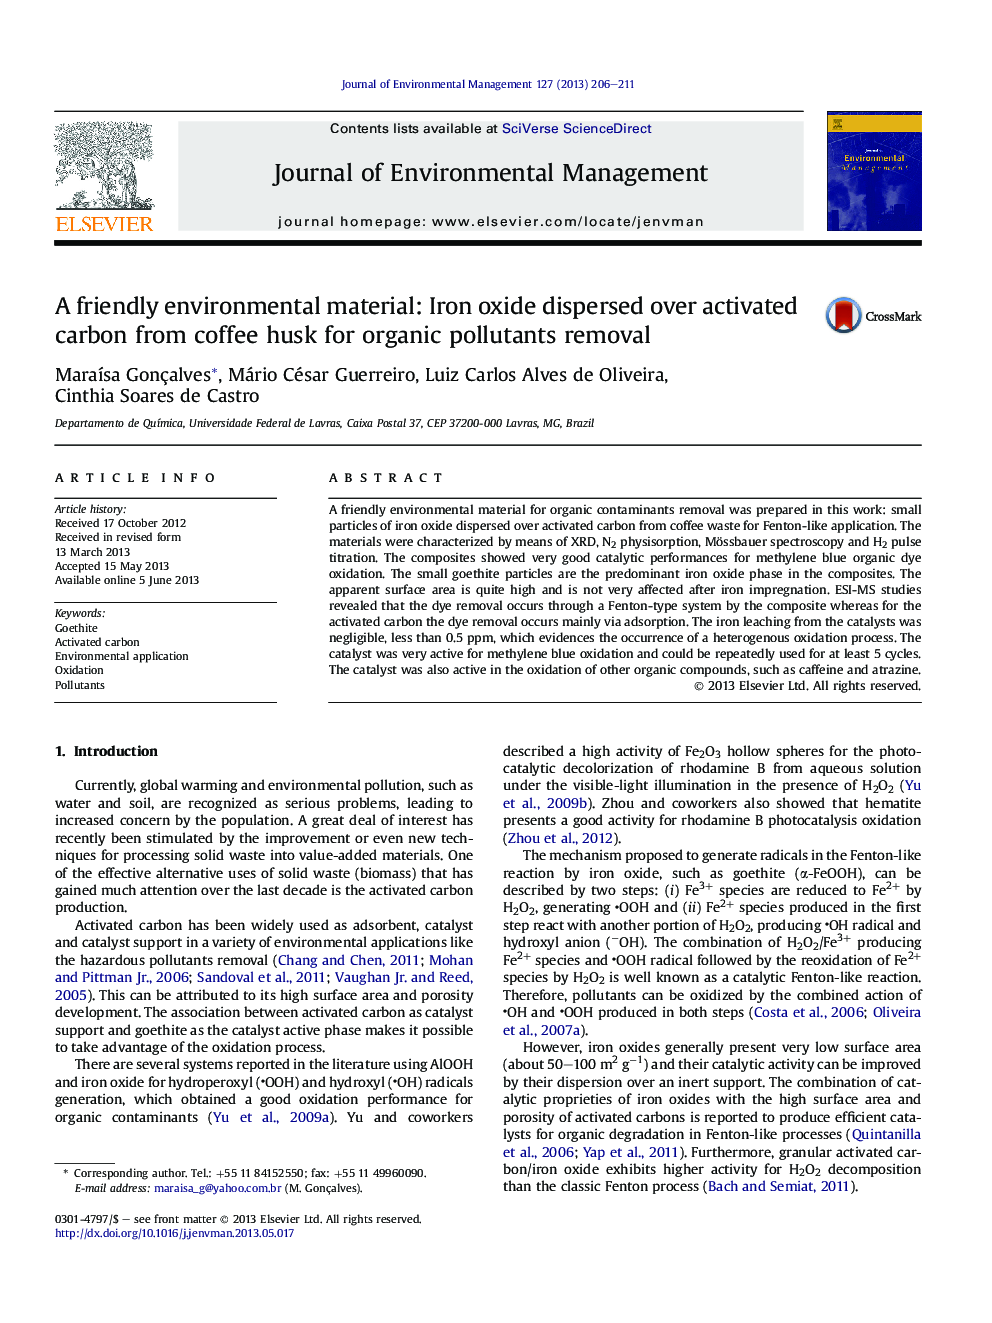 A friendly environmental material: Iron oxide dispersed over activated carbon from coffee husk for organic pollutants removal